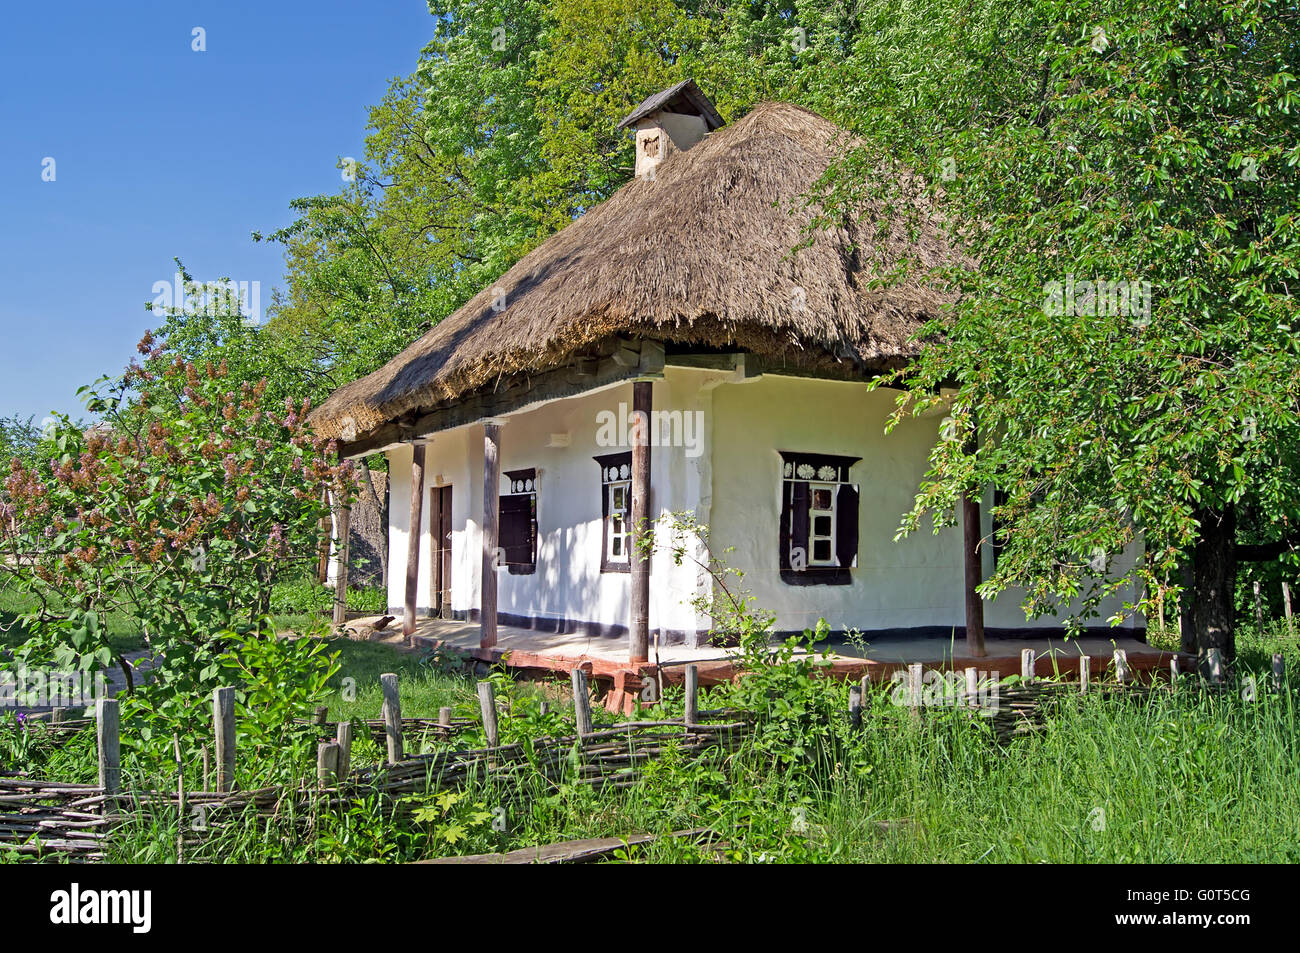 Old traditional house in Ukraine Stock Photo - Alamy